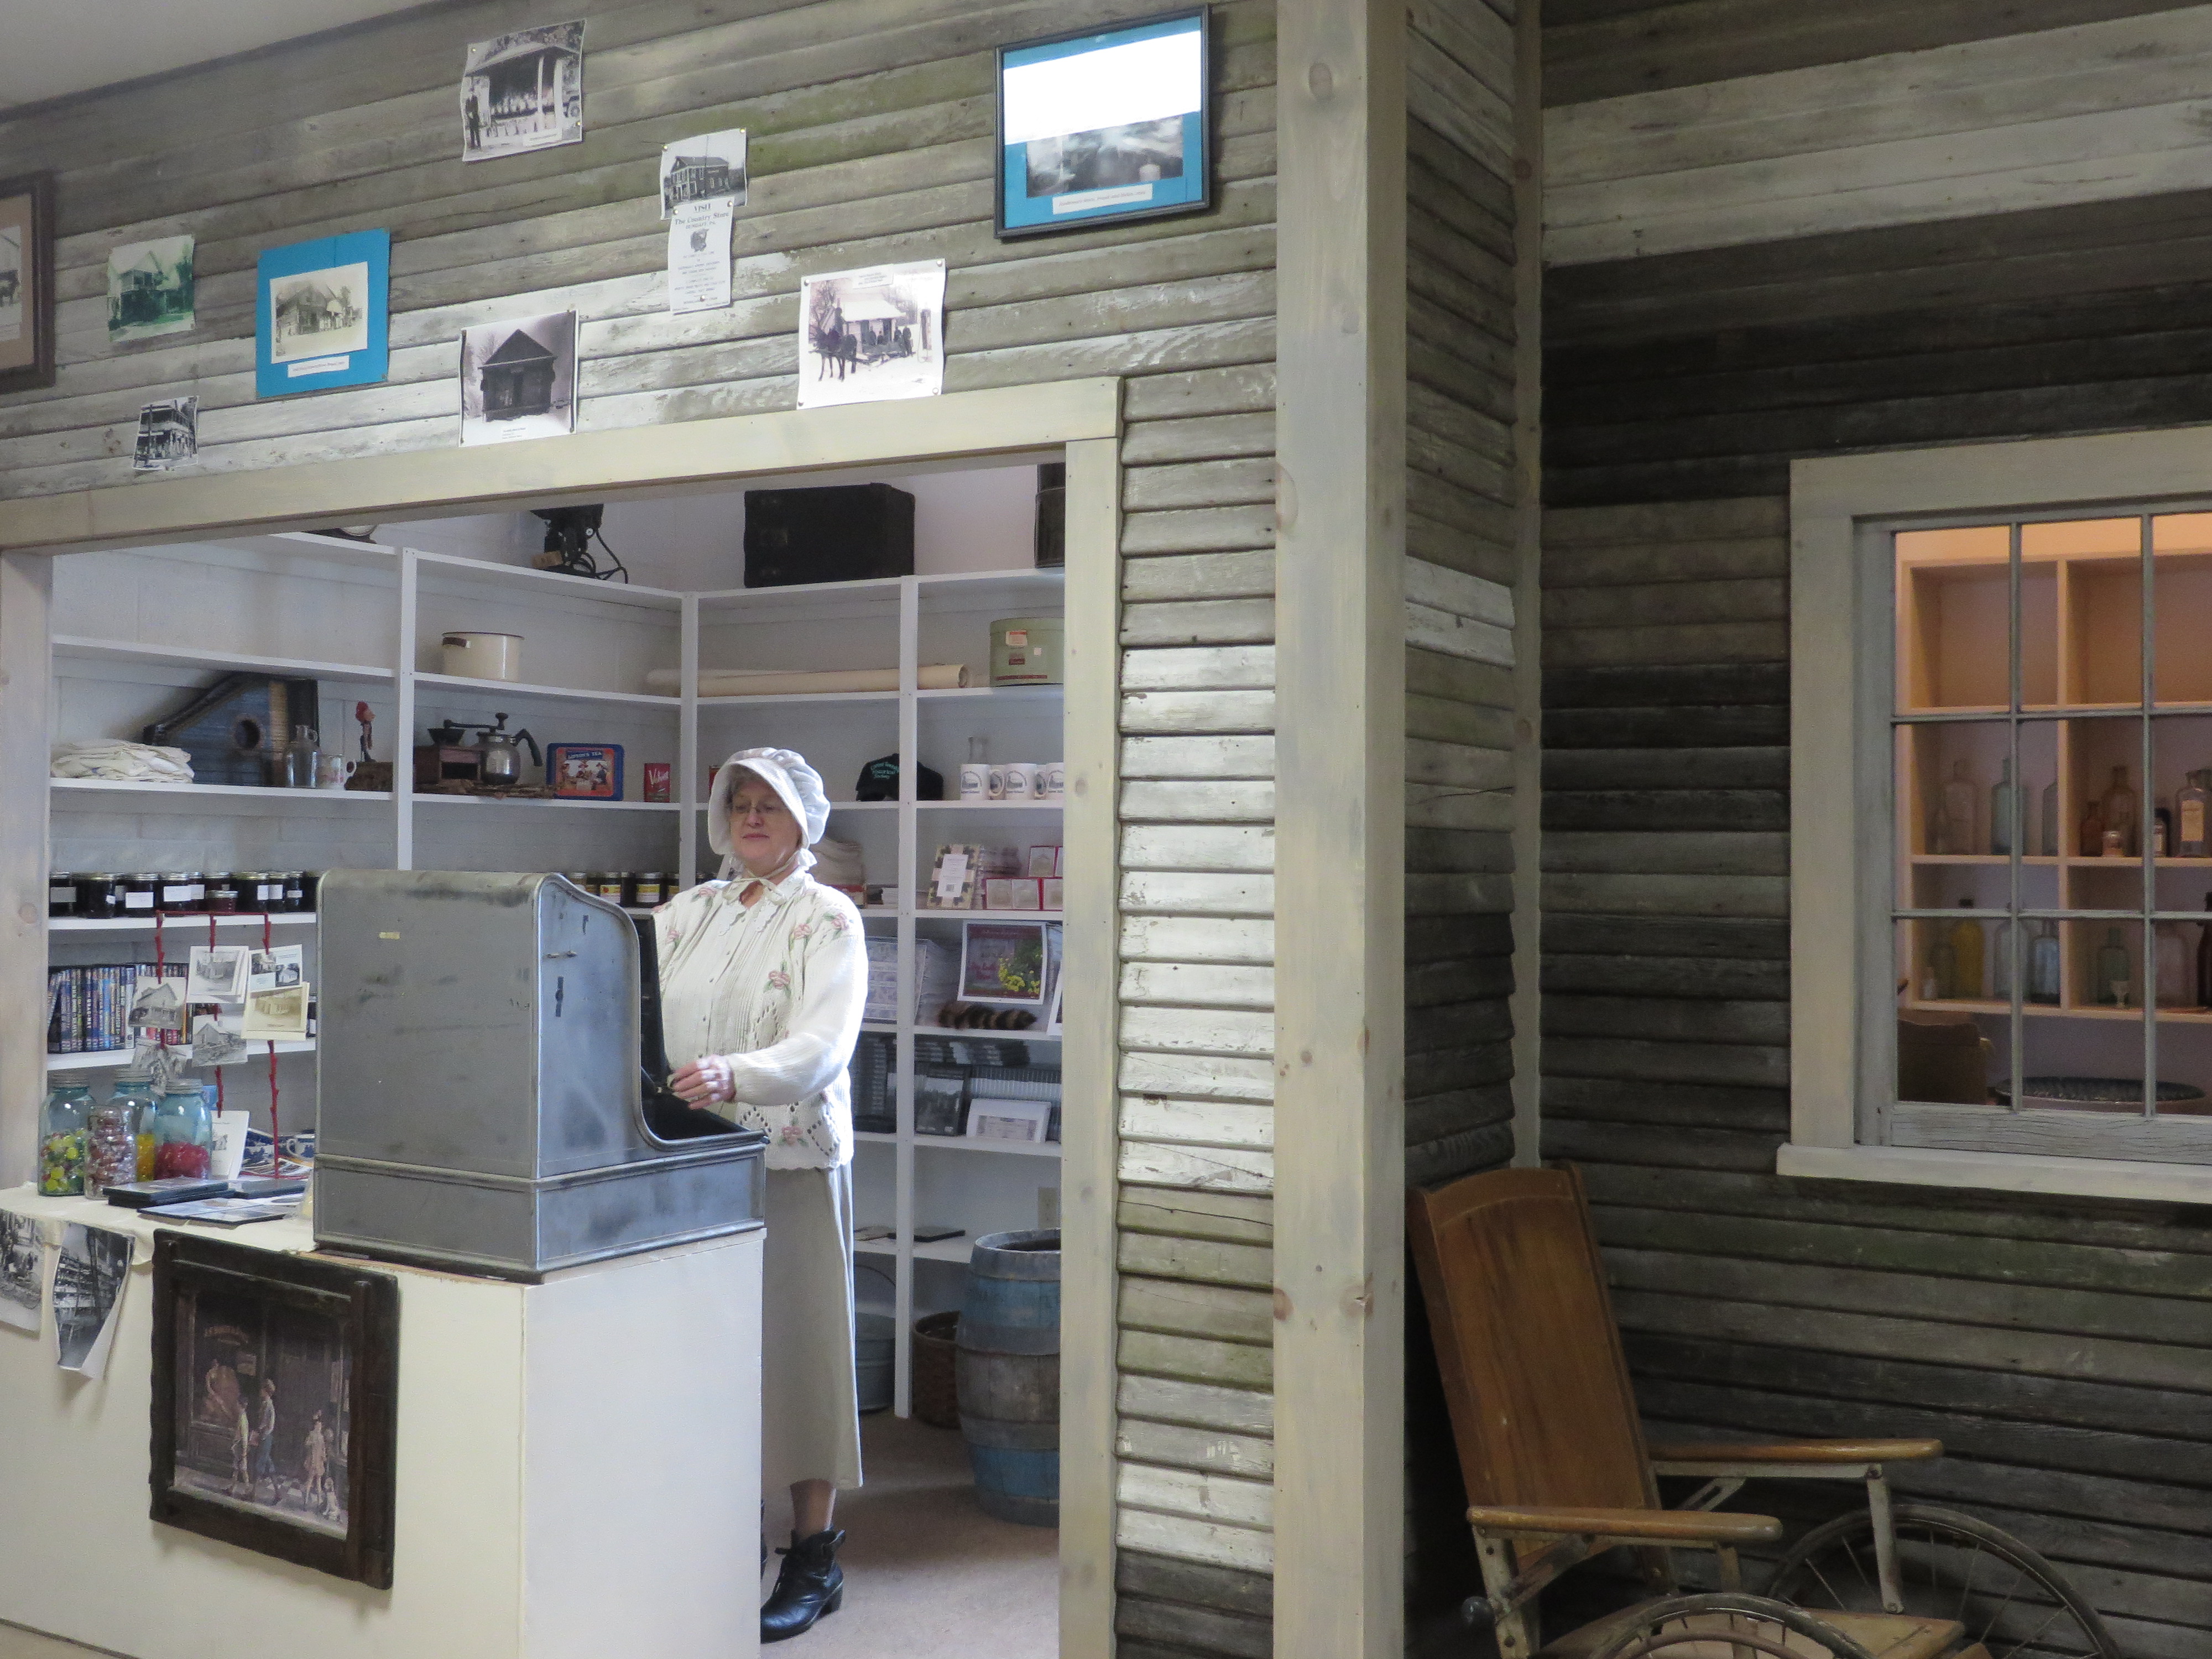 CTHS volunteer-director, Sandy Wilmot, stands ready to greet customers at the new and fully stocked General Store in the Museum of Local History, located in Clifford’s Community Center on Cemetery Street.  Come visit on Election Day, April 26th, 8:00am-8:00pm.